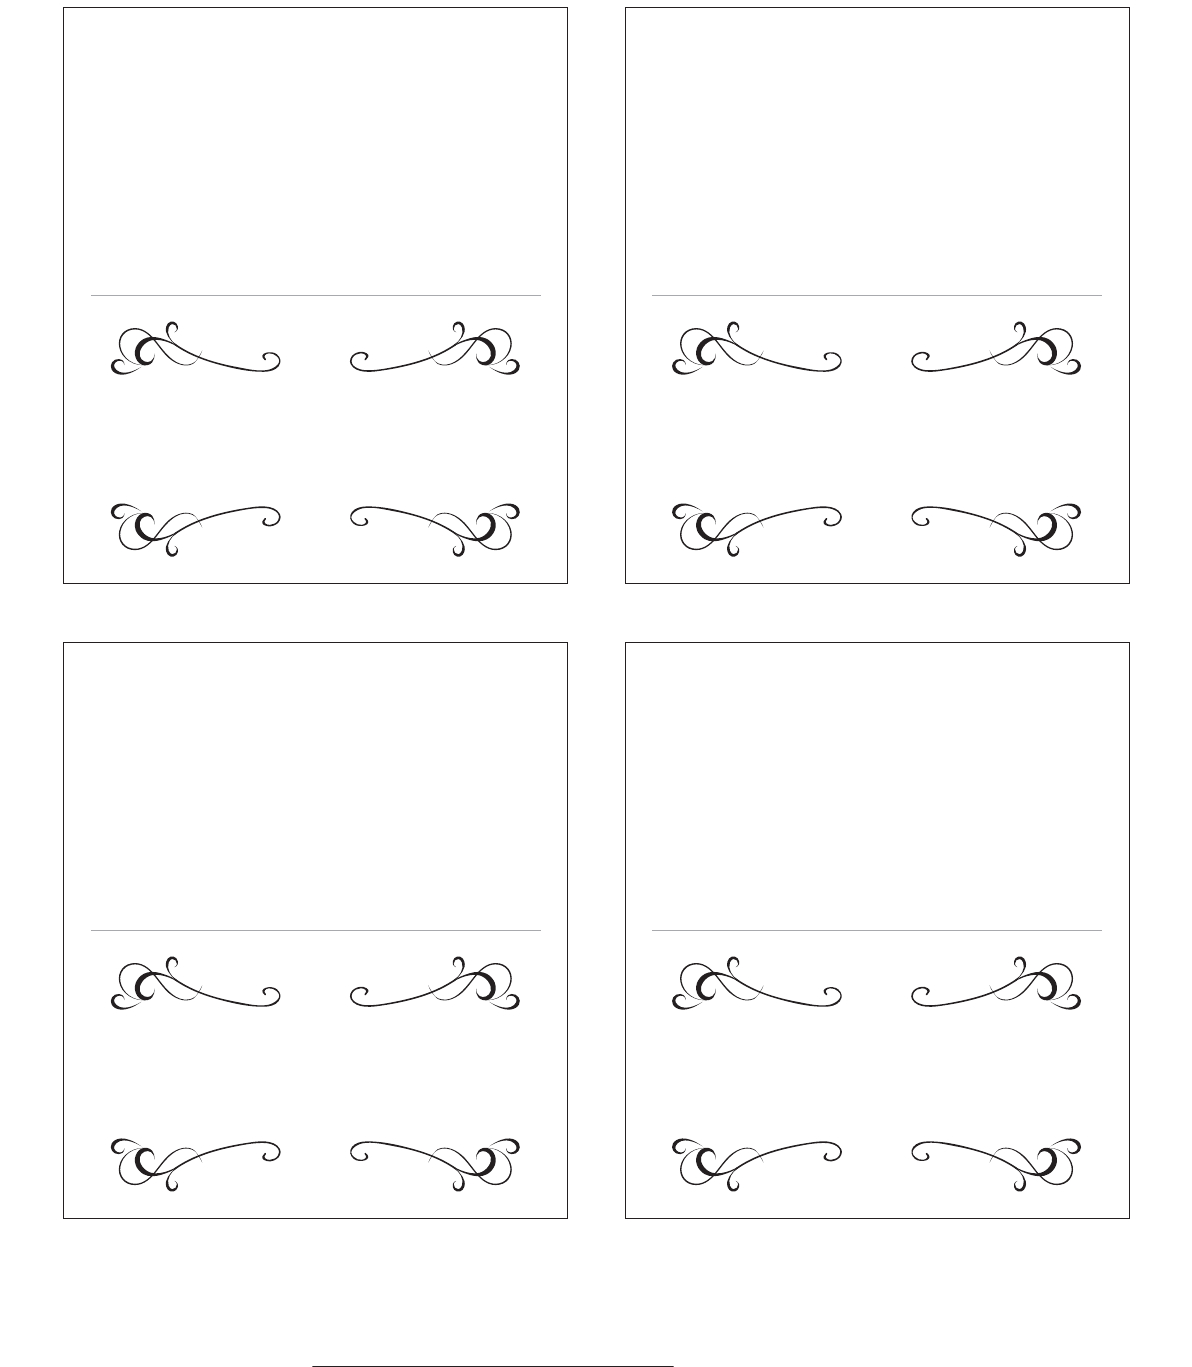 004 Template For Place Cards Printable Wedding Outstanding Intended For Free Place Card Templates 6 Per Page